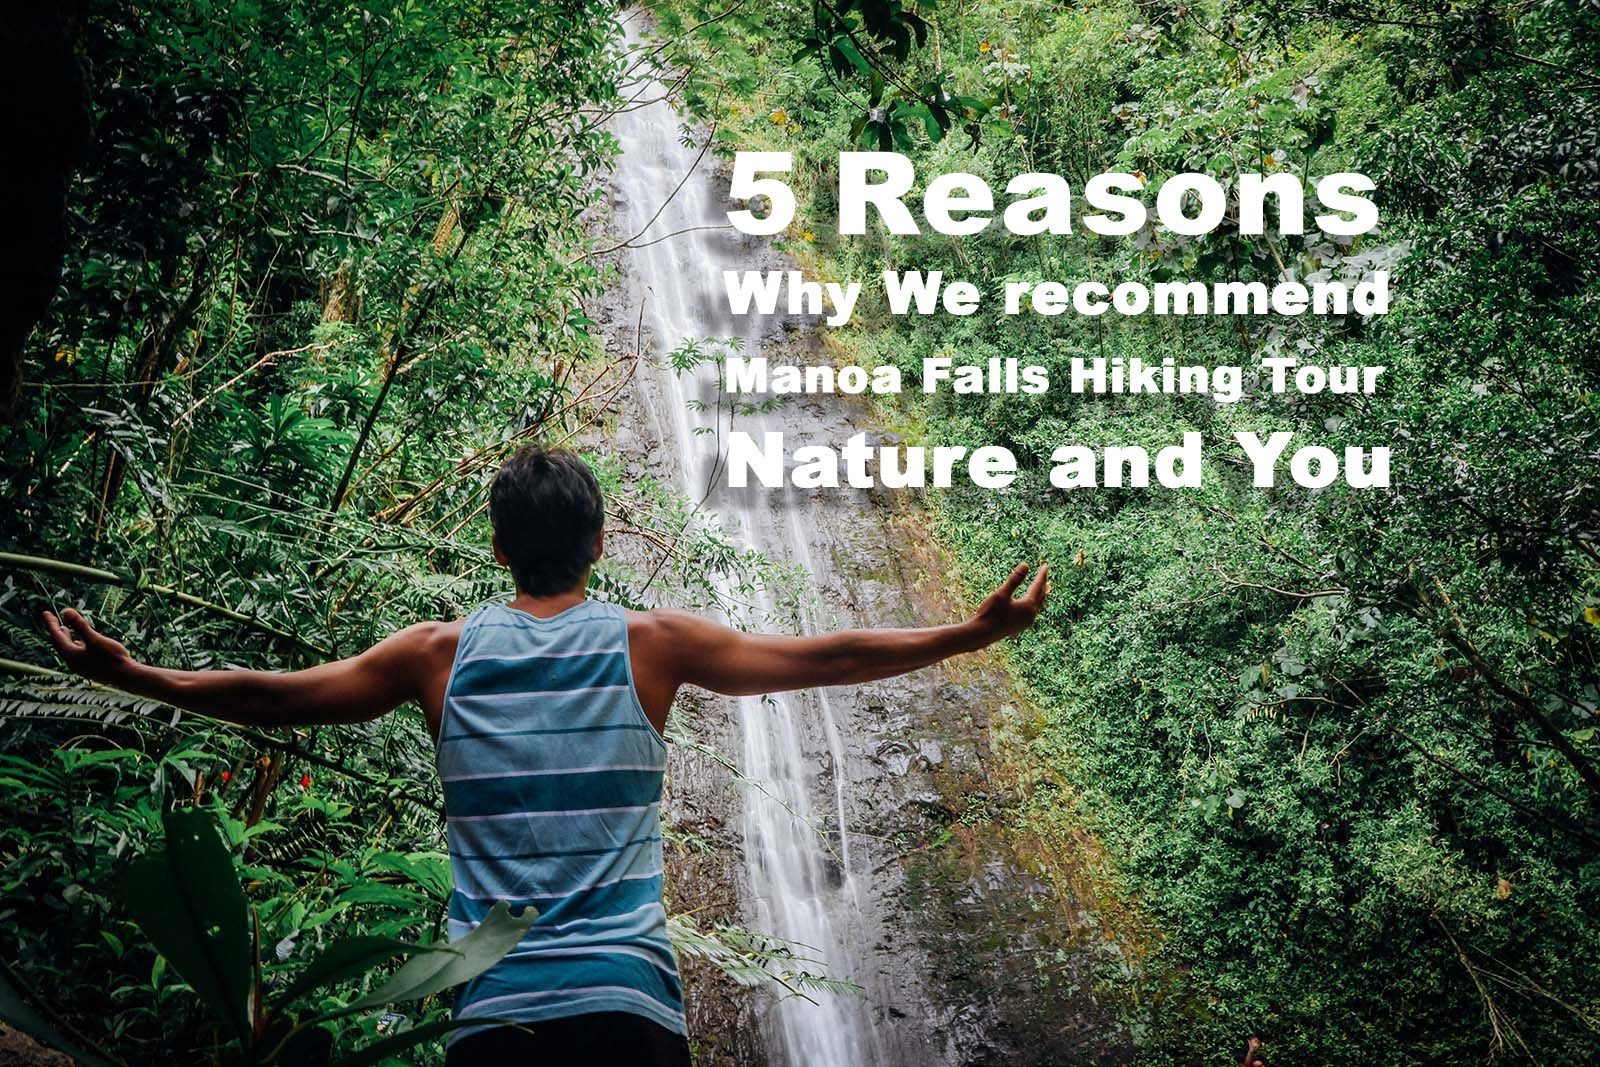 You are currently viewing 5 Reasons why we recommend Manoa Falls Hiking Tour, Nature and You